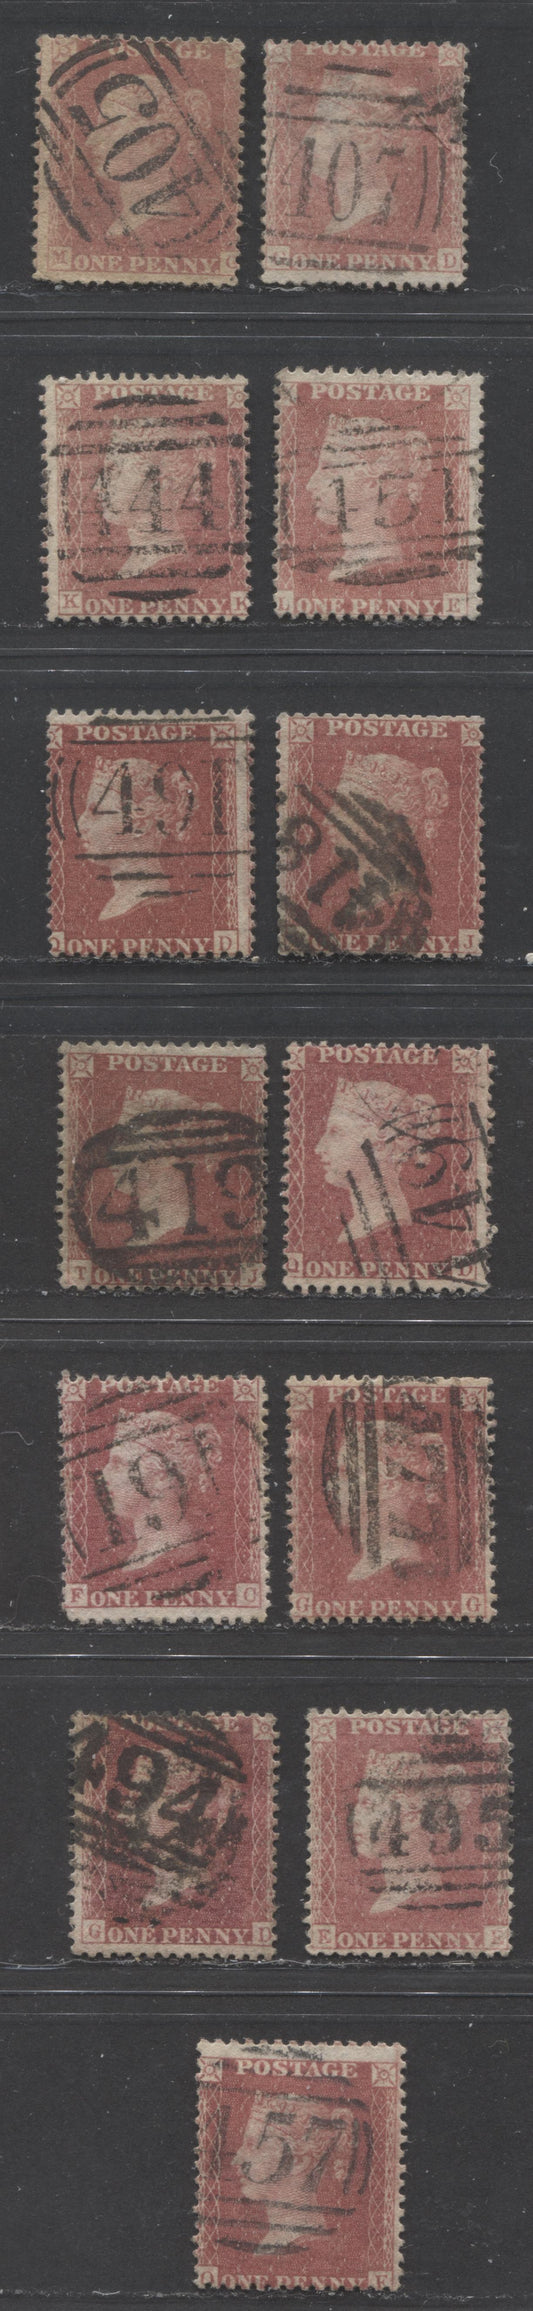 Lot  453 Great Britain - Barred Numeral Cancels For England & Wales: 400-499 SC#20 1d Rose Red, Pale Rose Red & Deep Rose Red 1857-1863 1d Red Stars, Large Crown, White Paper, Perf. 14 Issue, #405/495, 13 VG Used Singles, Estimated Value $120